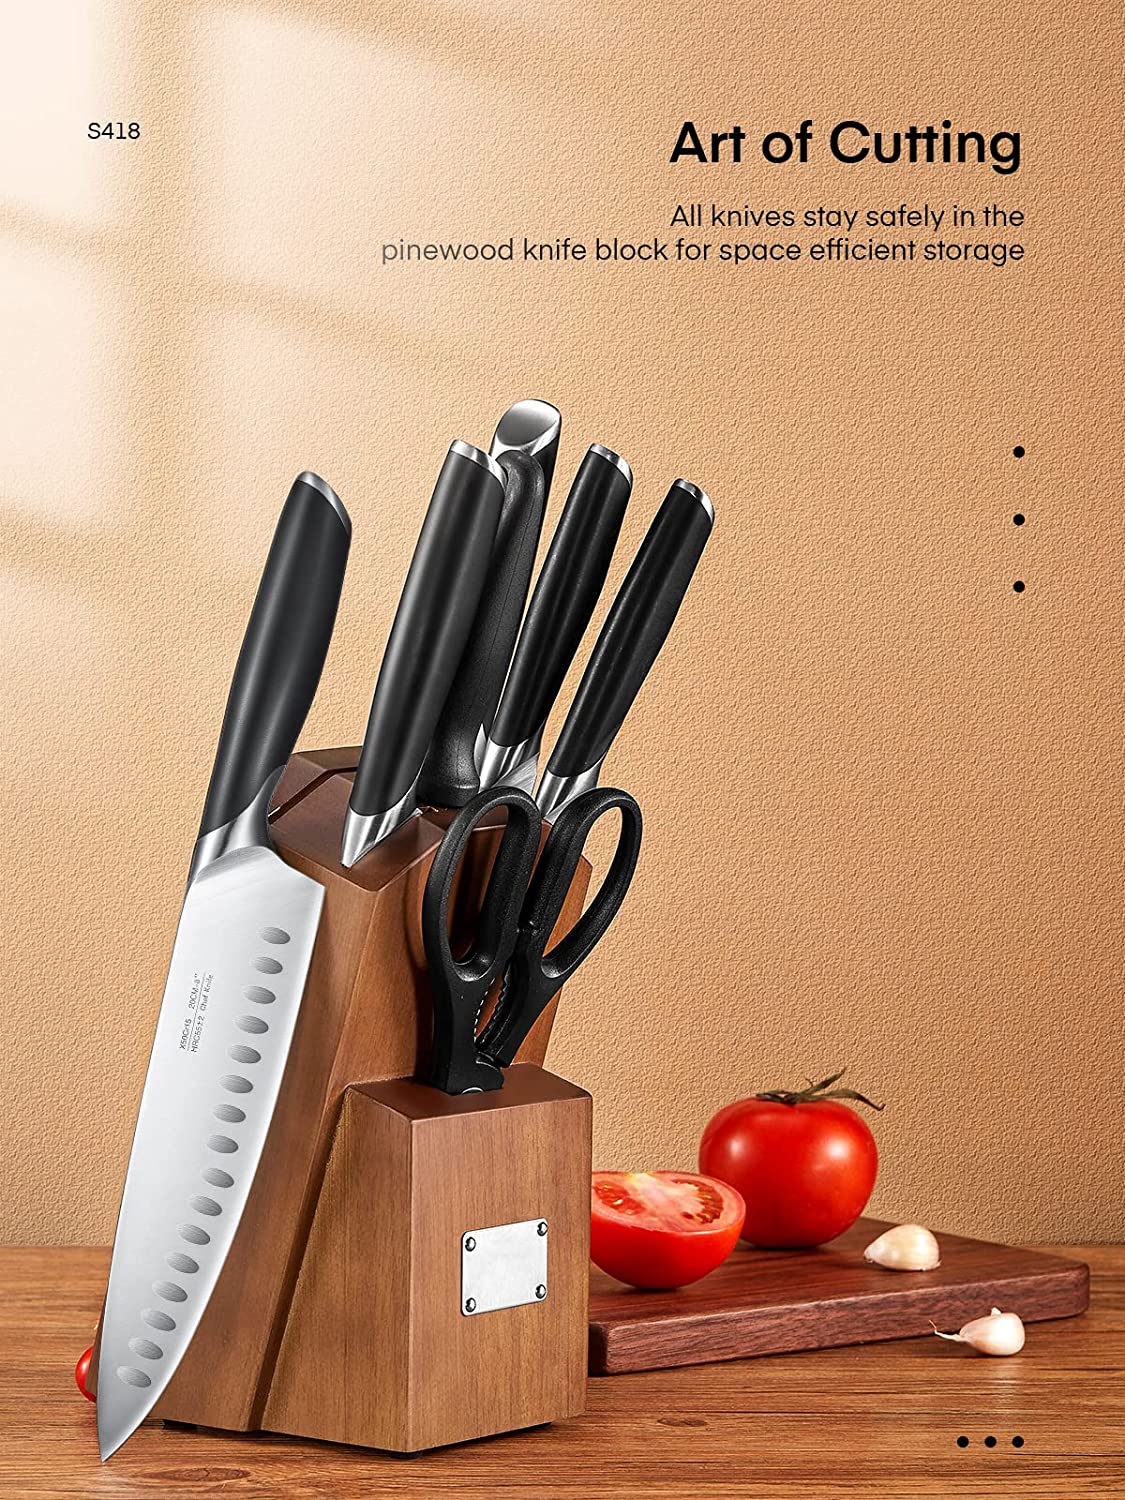 Kitchen Knife Set, 8 Piece Professional Knife Set, Knife Block Set with Wood Block, German High Carbon Stainless Steel